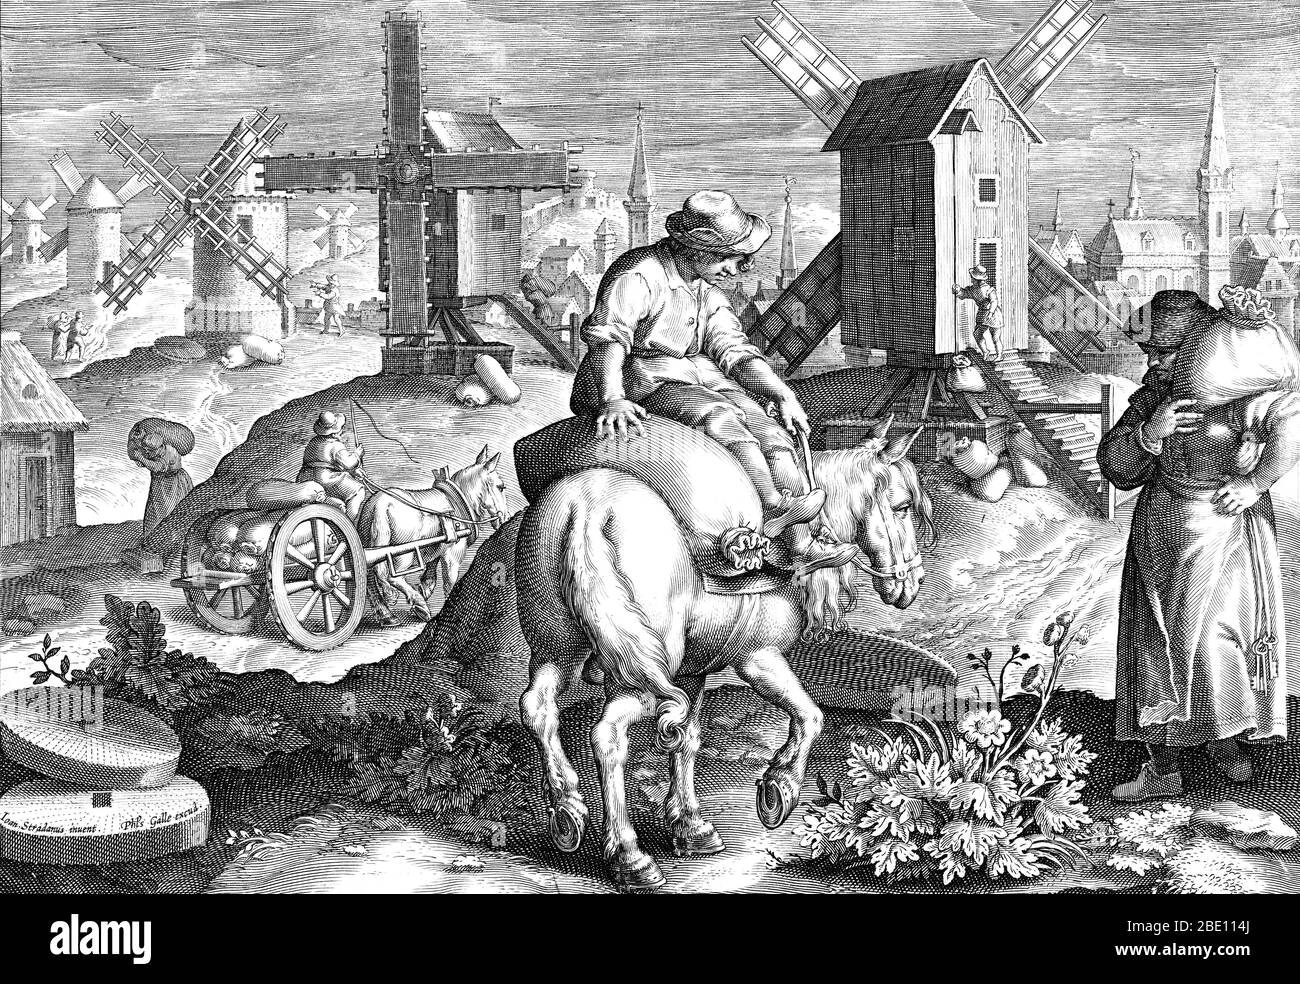 PLATE 11. The Invention of the Windmill. Eleventh plate from a print series entitled Nova Reperta (New Inventions of Modern Times) consisting of a title page and 19 plates, engraved by Jan Collaert I, after Jan van der Straet, called Stradanus, and published by Philips Galle. Illustration of several wind mills in a landscape. A town with its churches is depicted in the background on the right. In the middle ground a woman carries a sack on her back, a man drives a horse-drawn carriage with more sacks, and a man draws a sack down from the top of a wind mill. In the foreground a man carries a sa Stock Photo